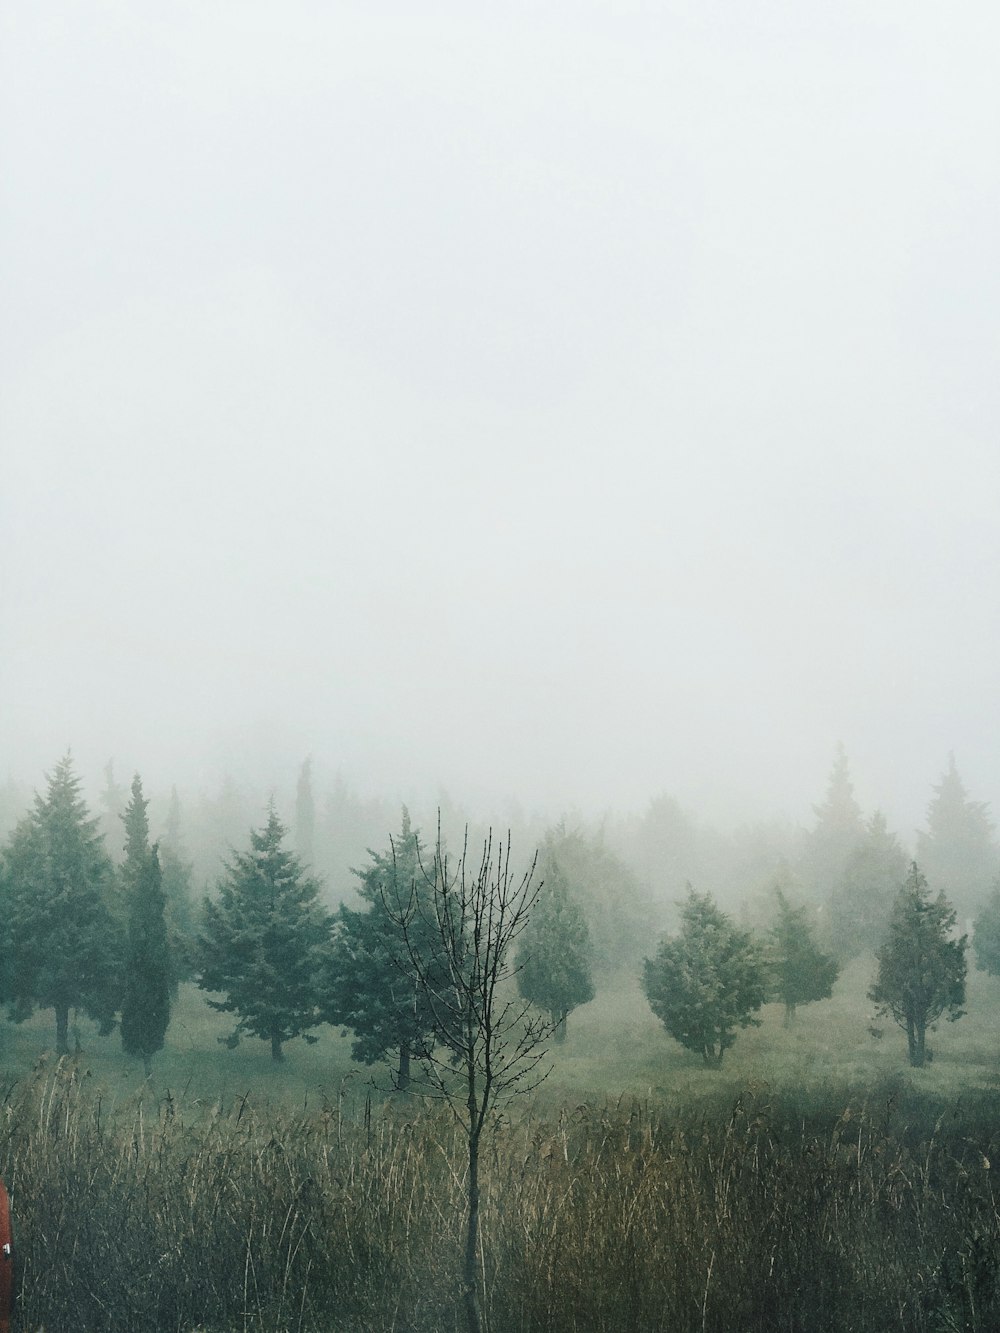 grey fog over plains with pine trees